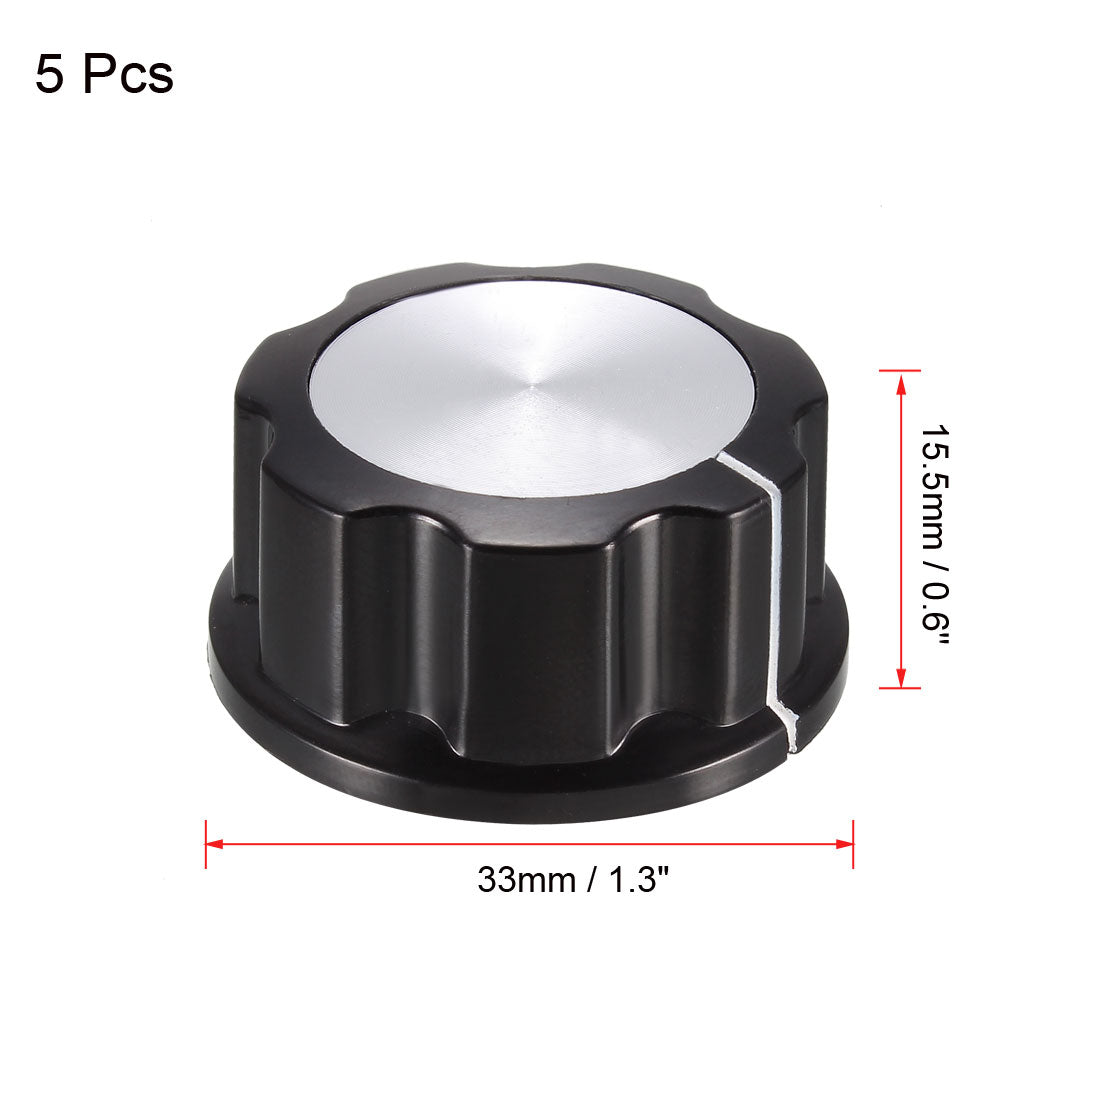 uxcell Uxcell 5Pcs Speaker Control Knob Power Amplifier Knob 33mm Dia. Rotary Knobs for 6mm Dia. Shaft Potentiometer